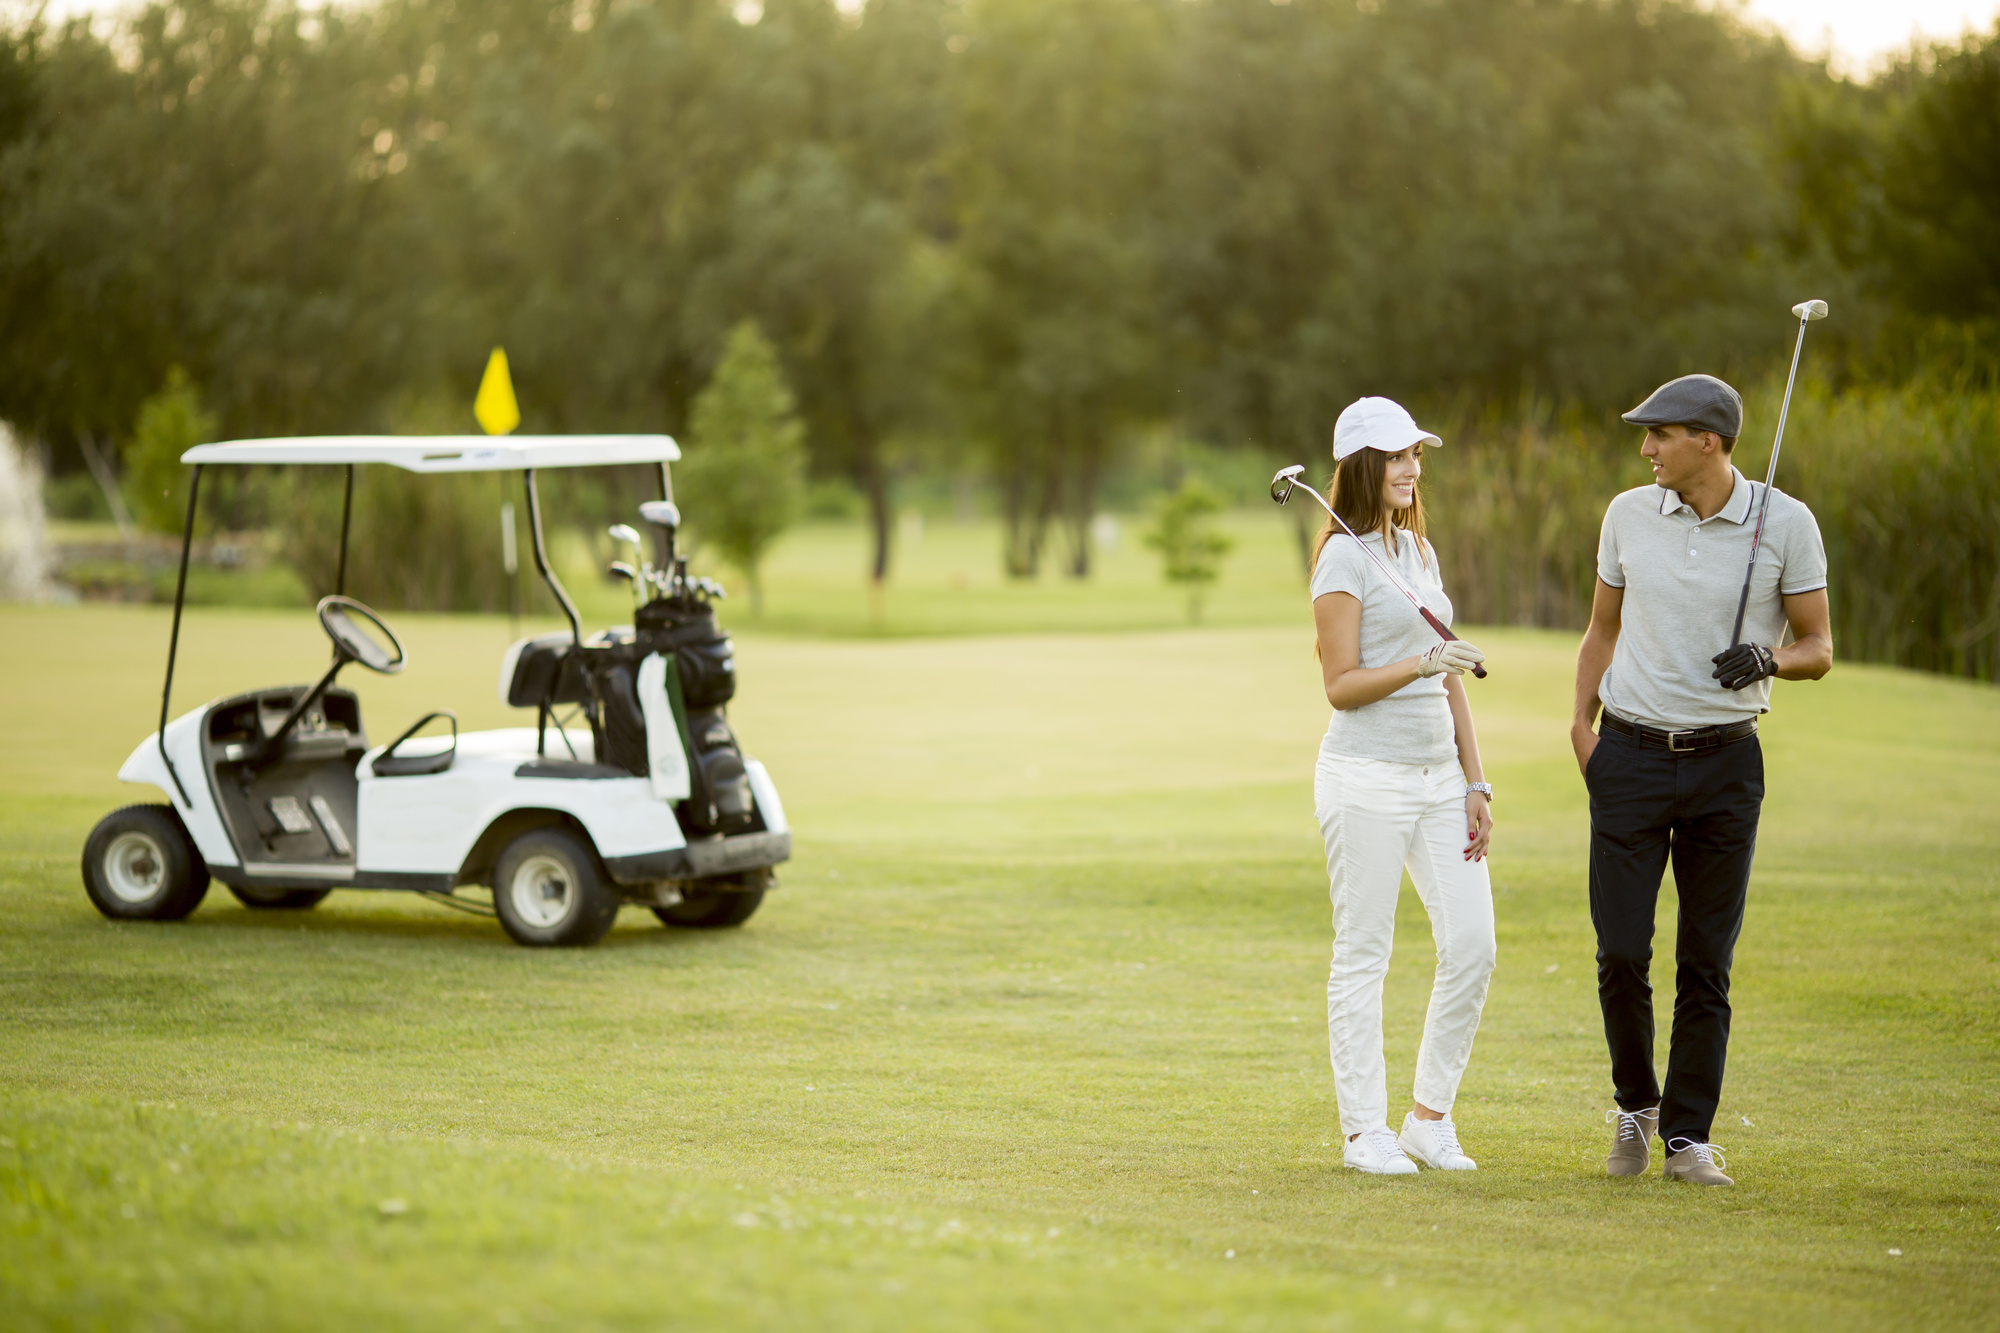 Golf Vacation Checklist: The Complete Guide for New Players